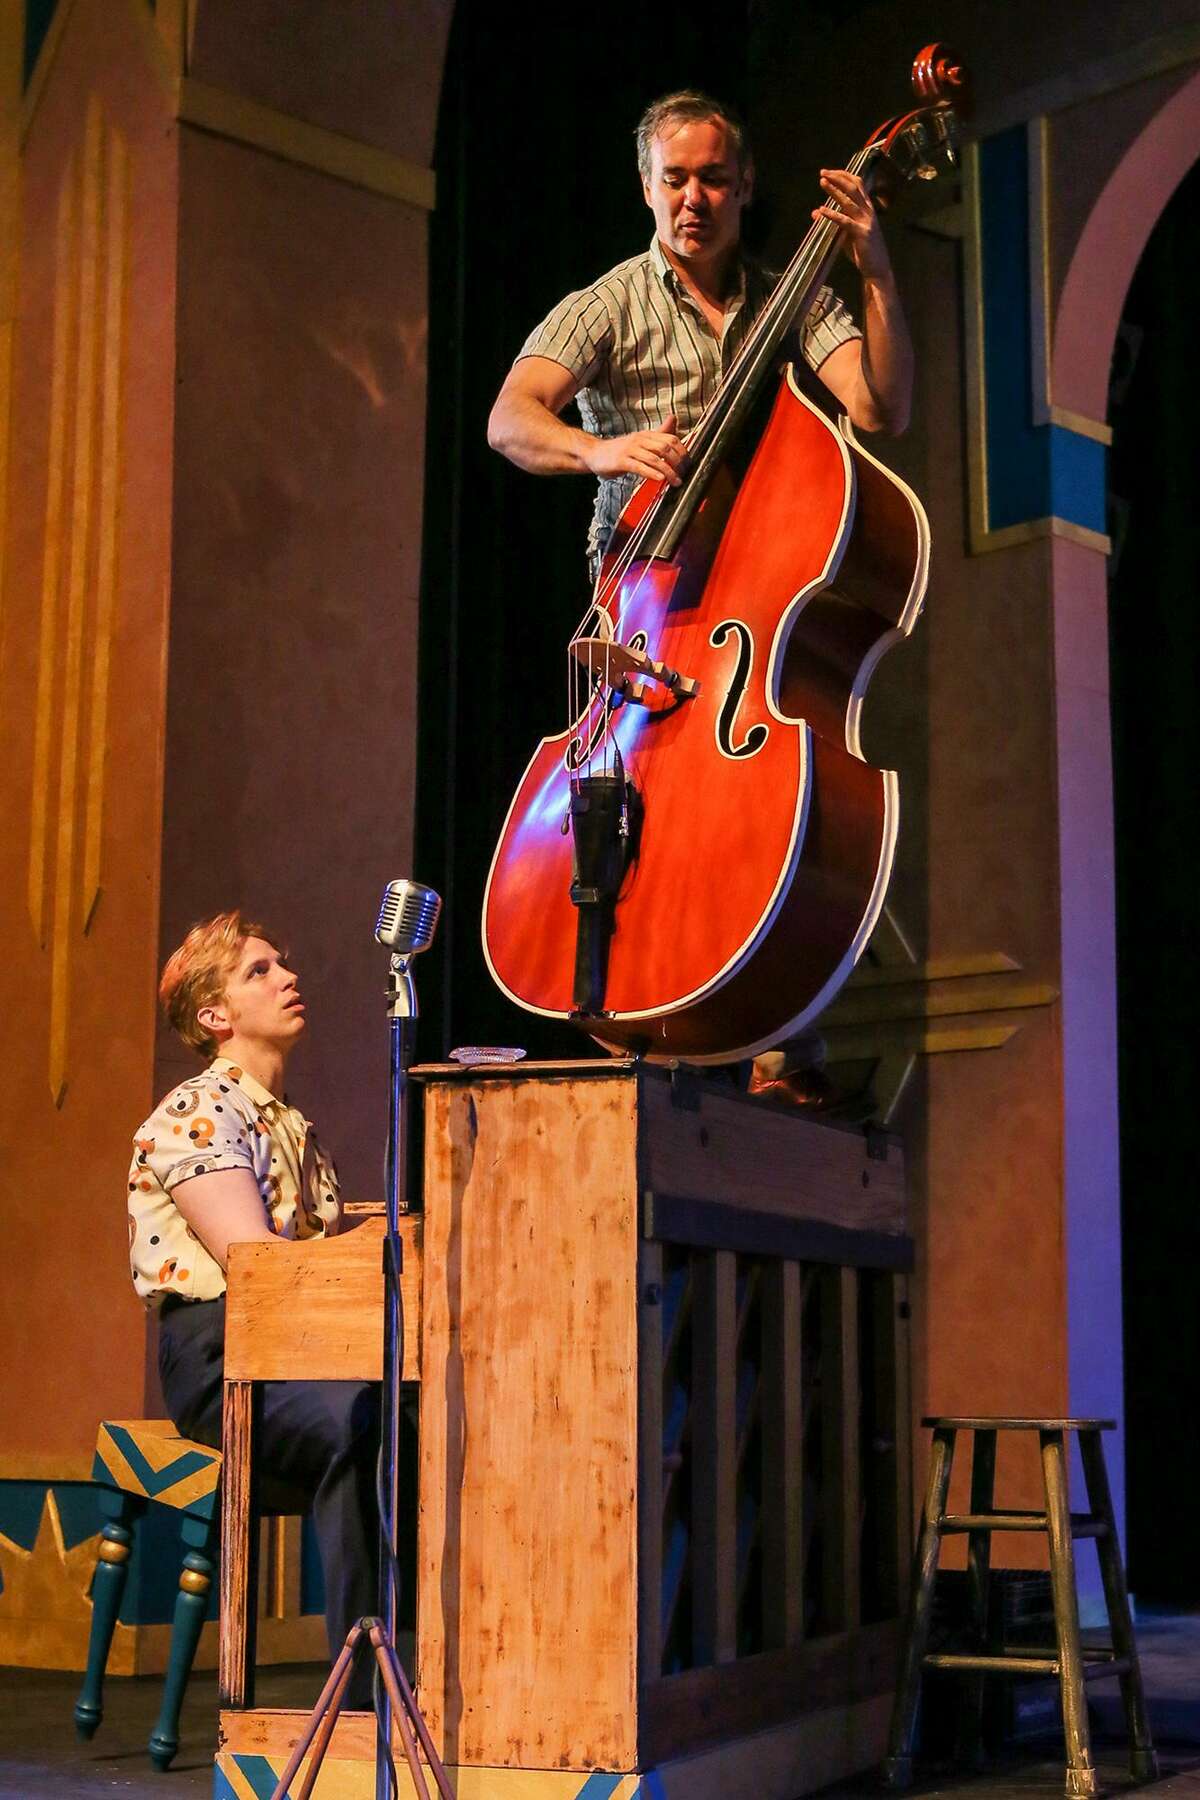 Nathan Yates, top, portraying Carl Perkins' brother, Jay, plays bass on top of the piano played by Gavin Rohrer, portraying Jerry Lee Lewis, during a rehearsal for the musical "Million Dollar Quartet" at The Public Theater on Sunday, March 17, 2019.